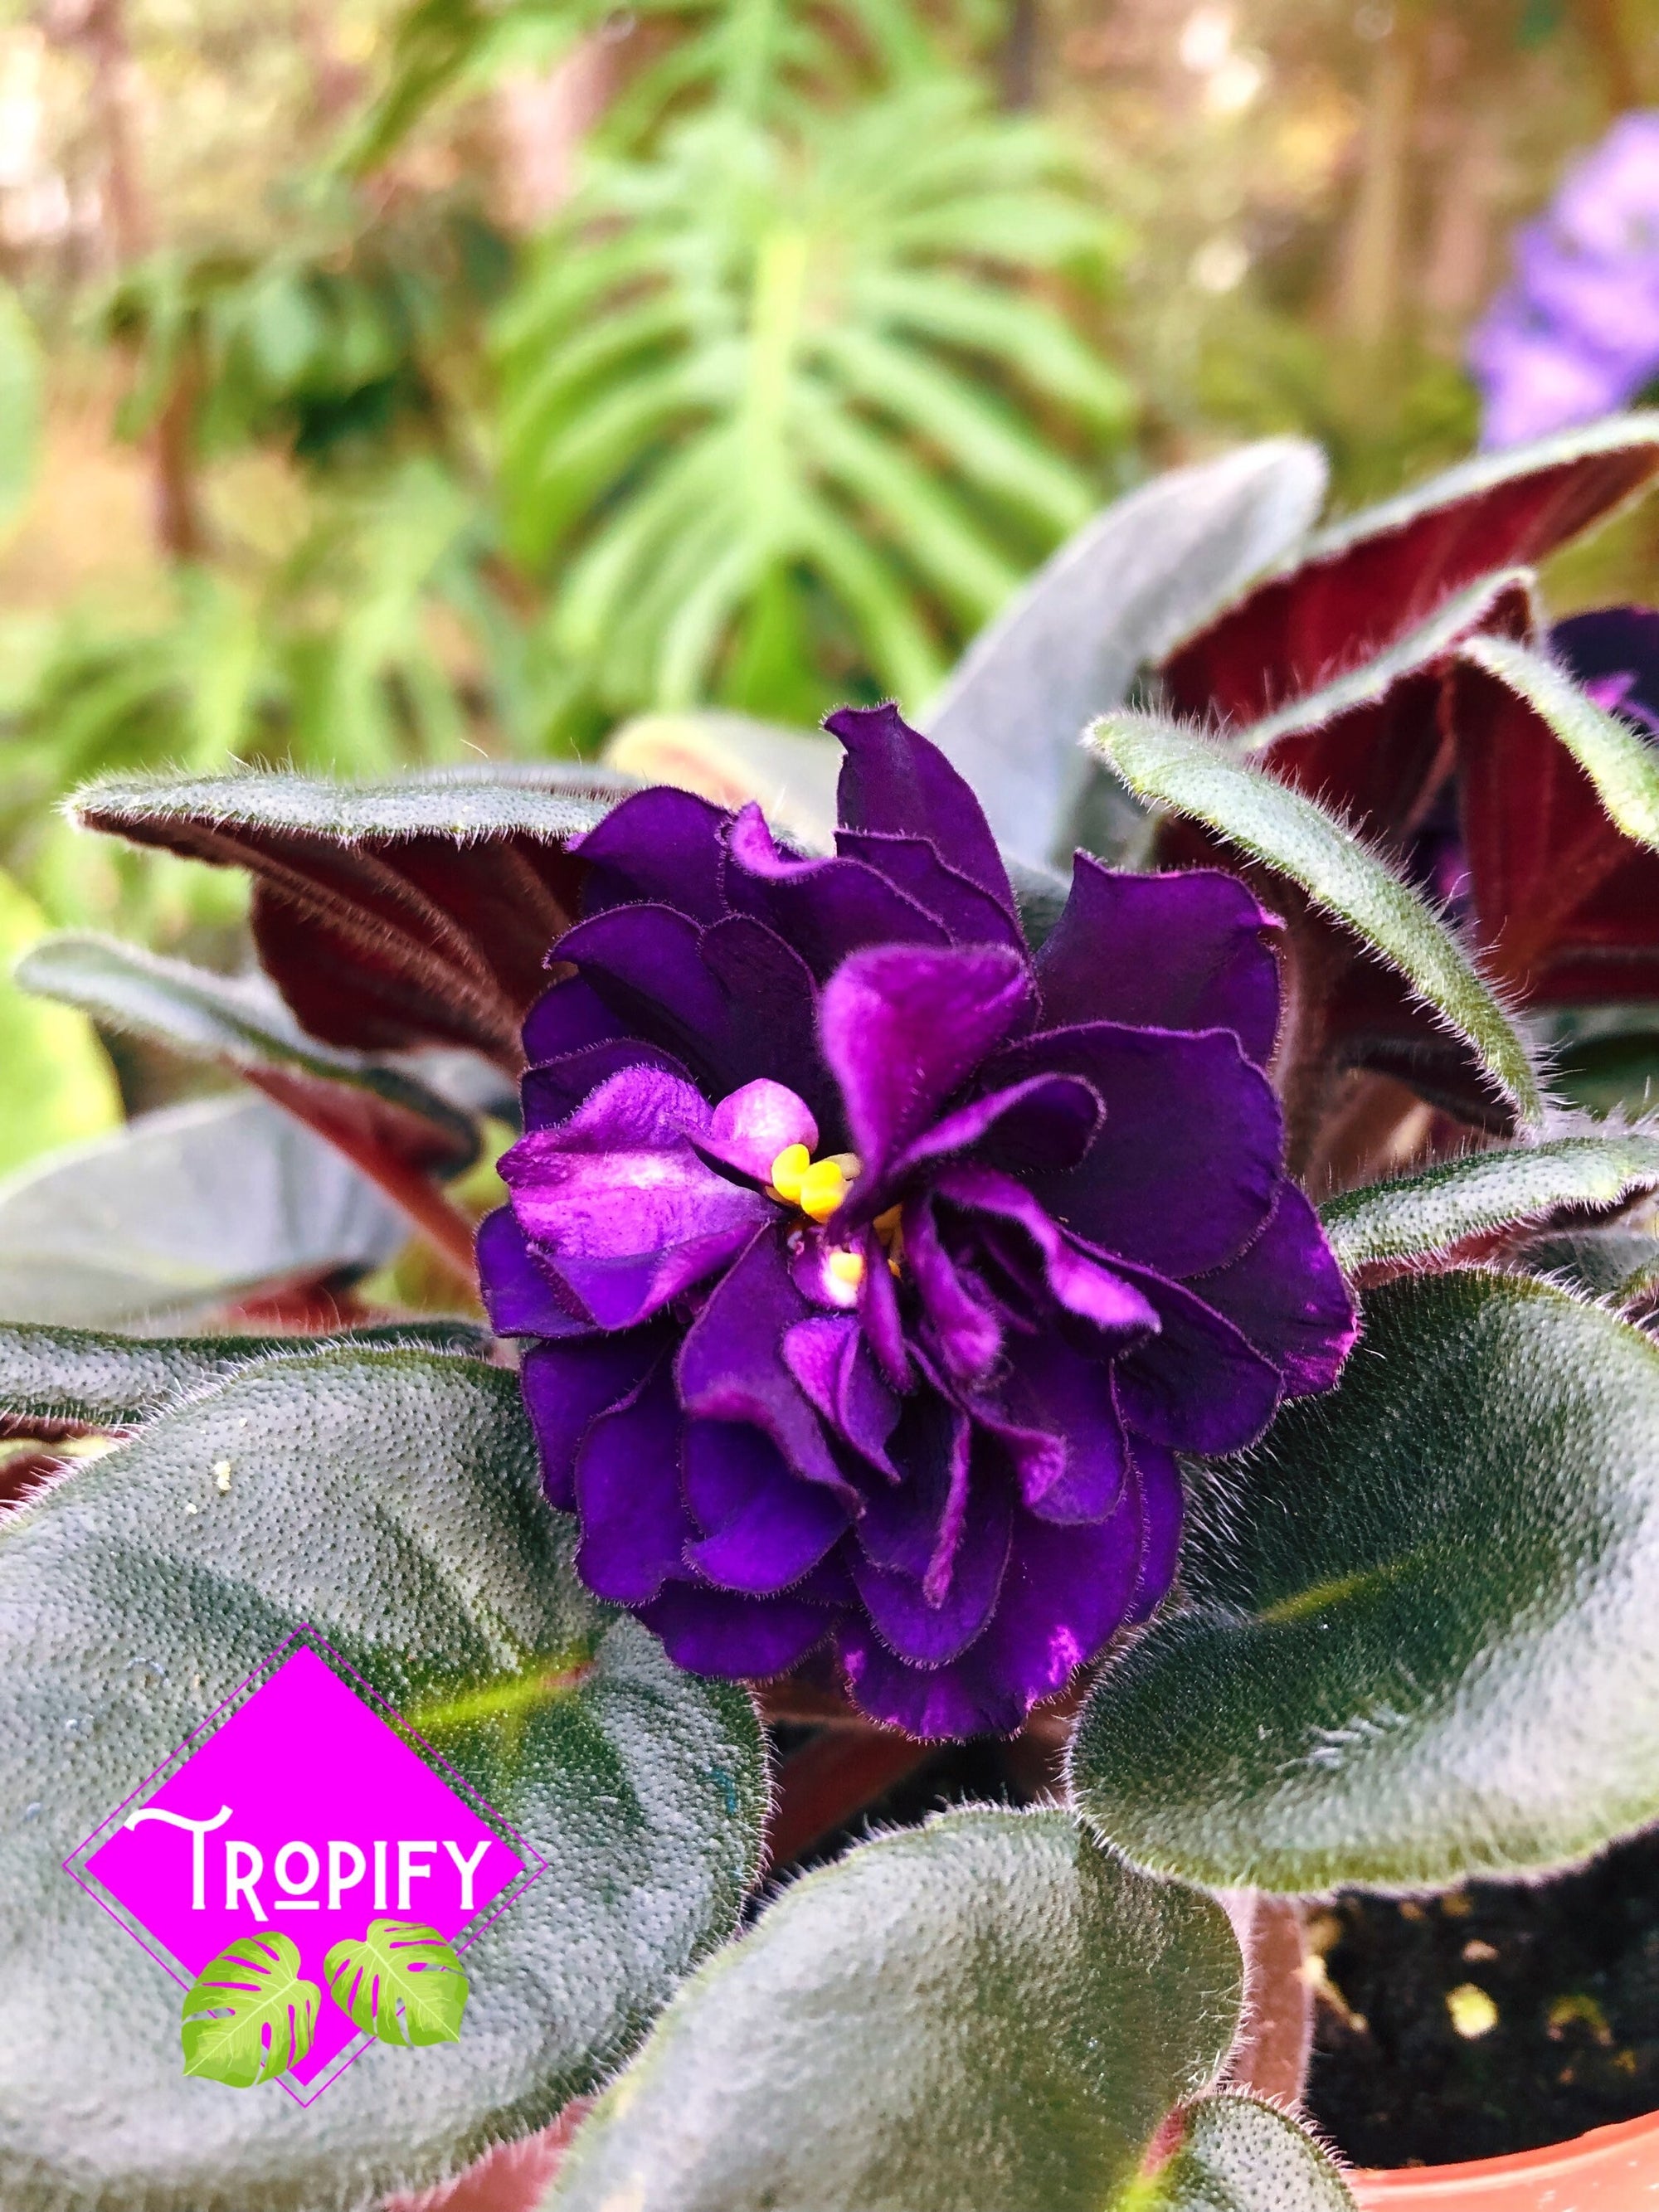 Live house plant African Violet Harmony’s ‘Black Pearl’ garden 4” flower flowering Potted gift